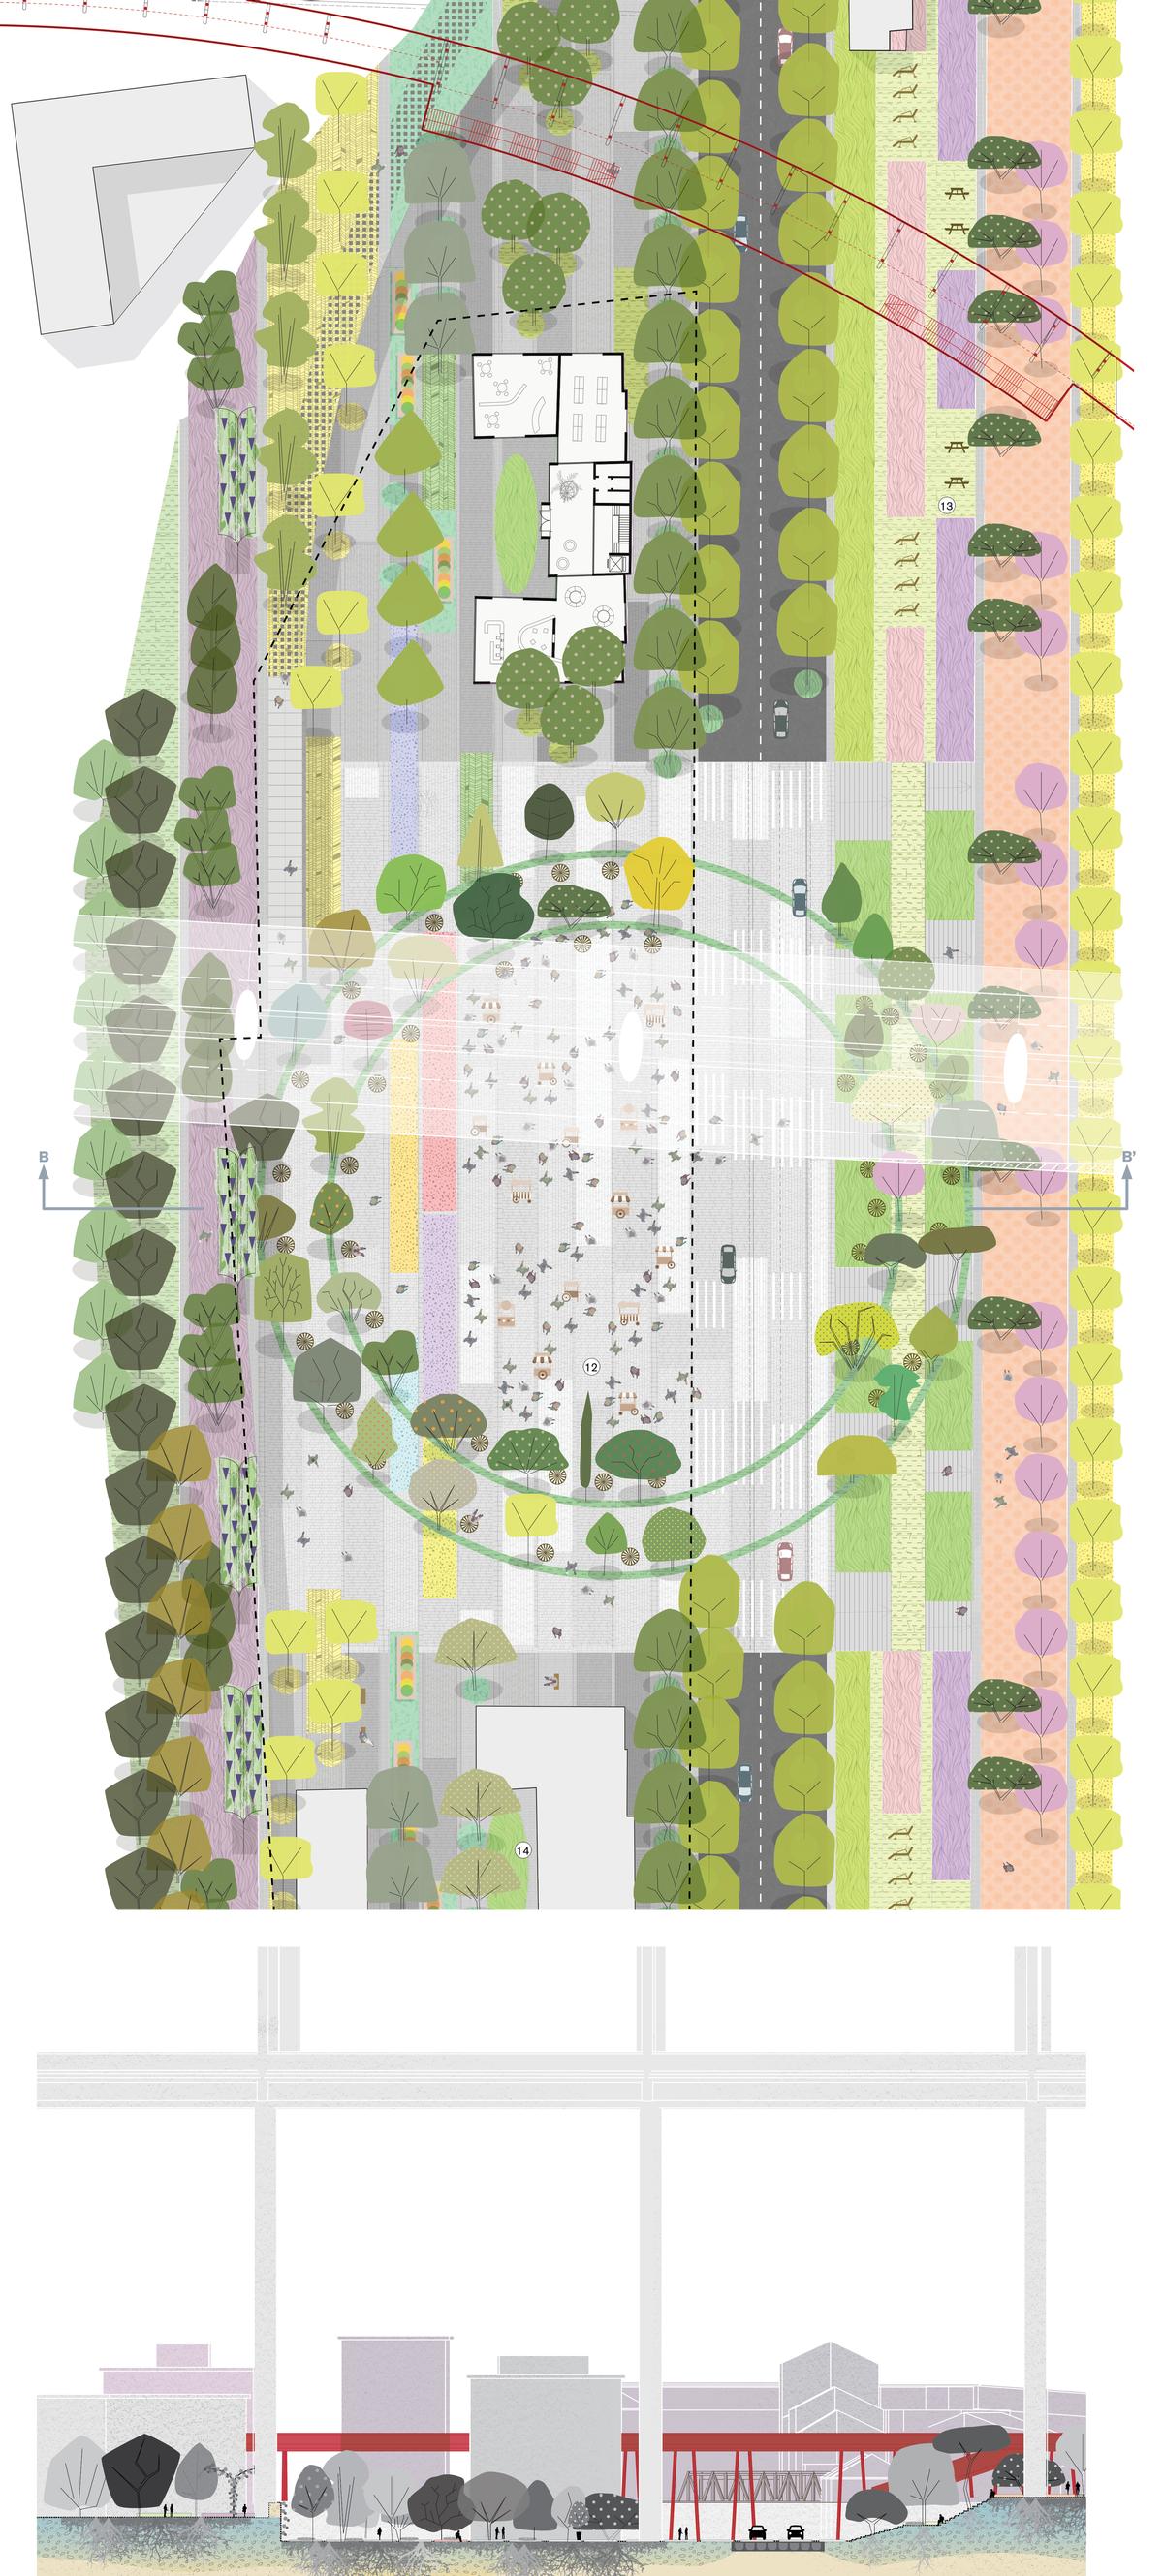 The Polcevera Park is a series of parks with different ecologies and infrastructures